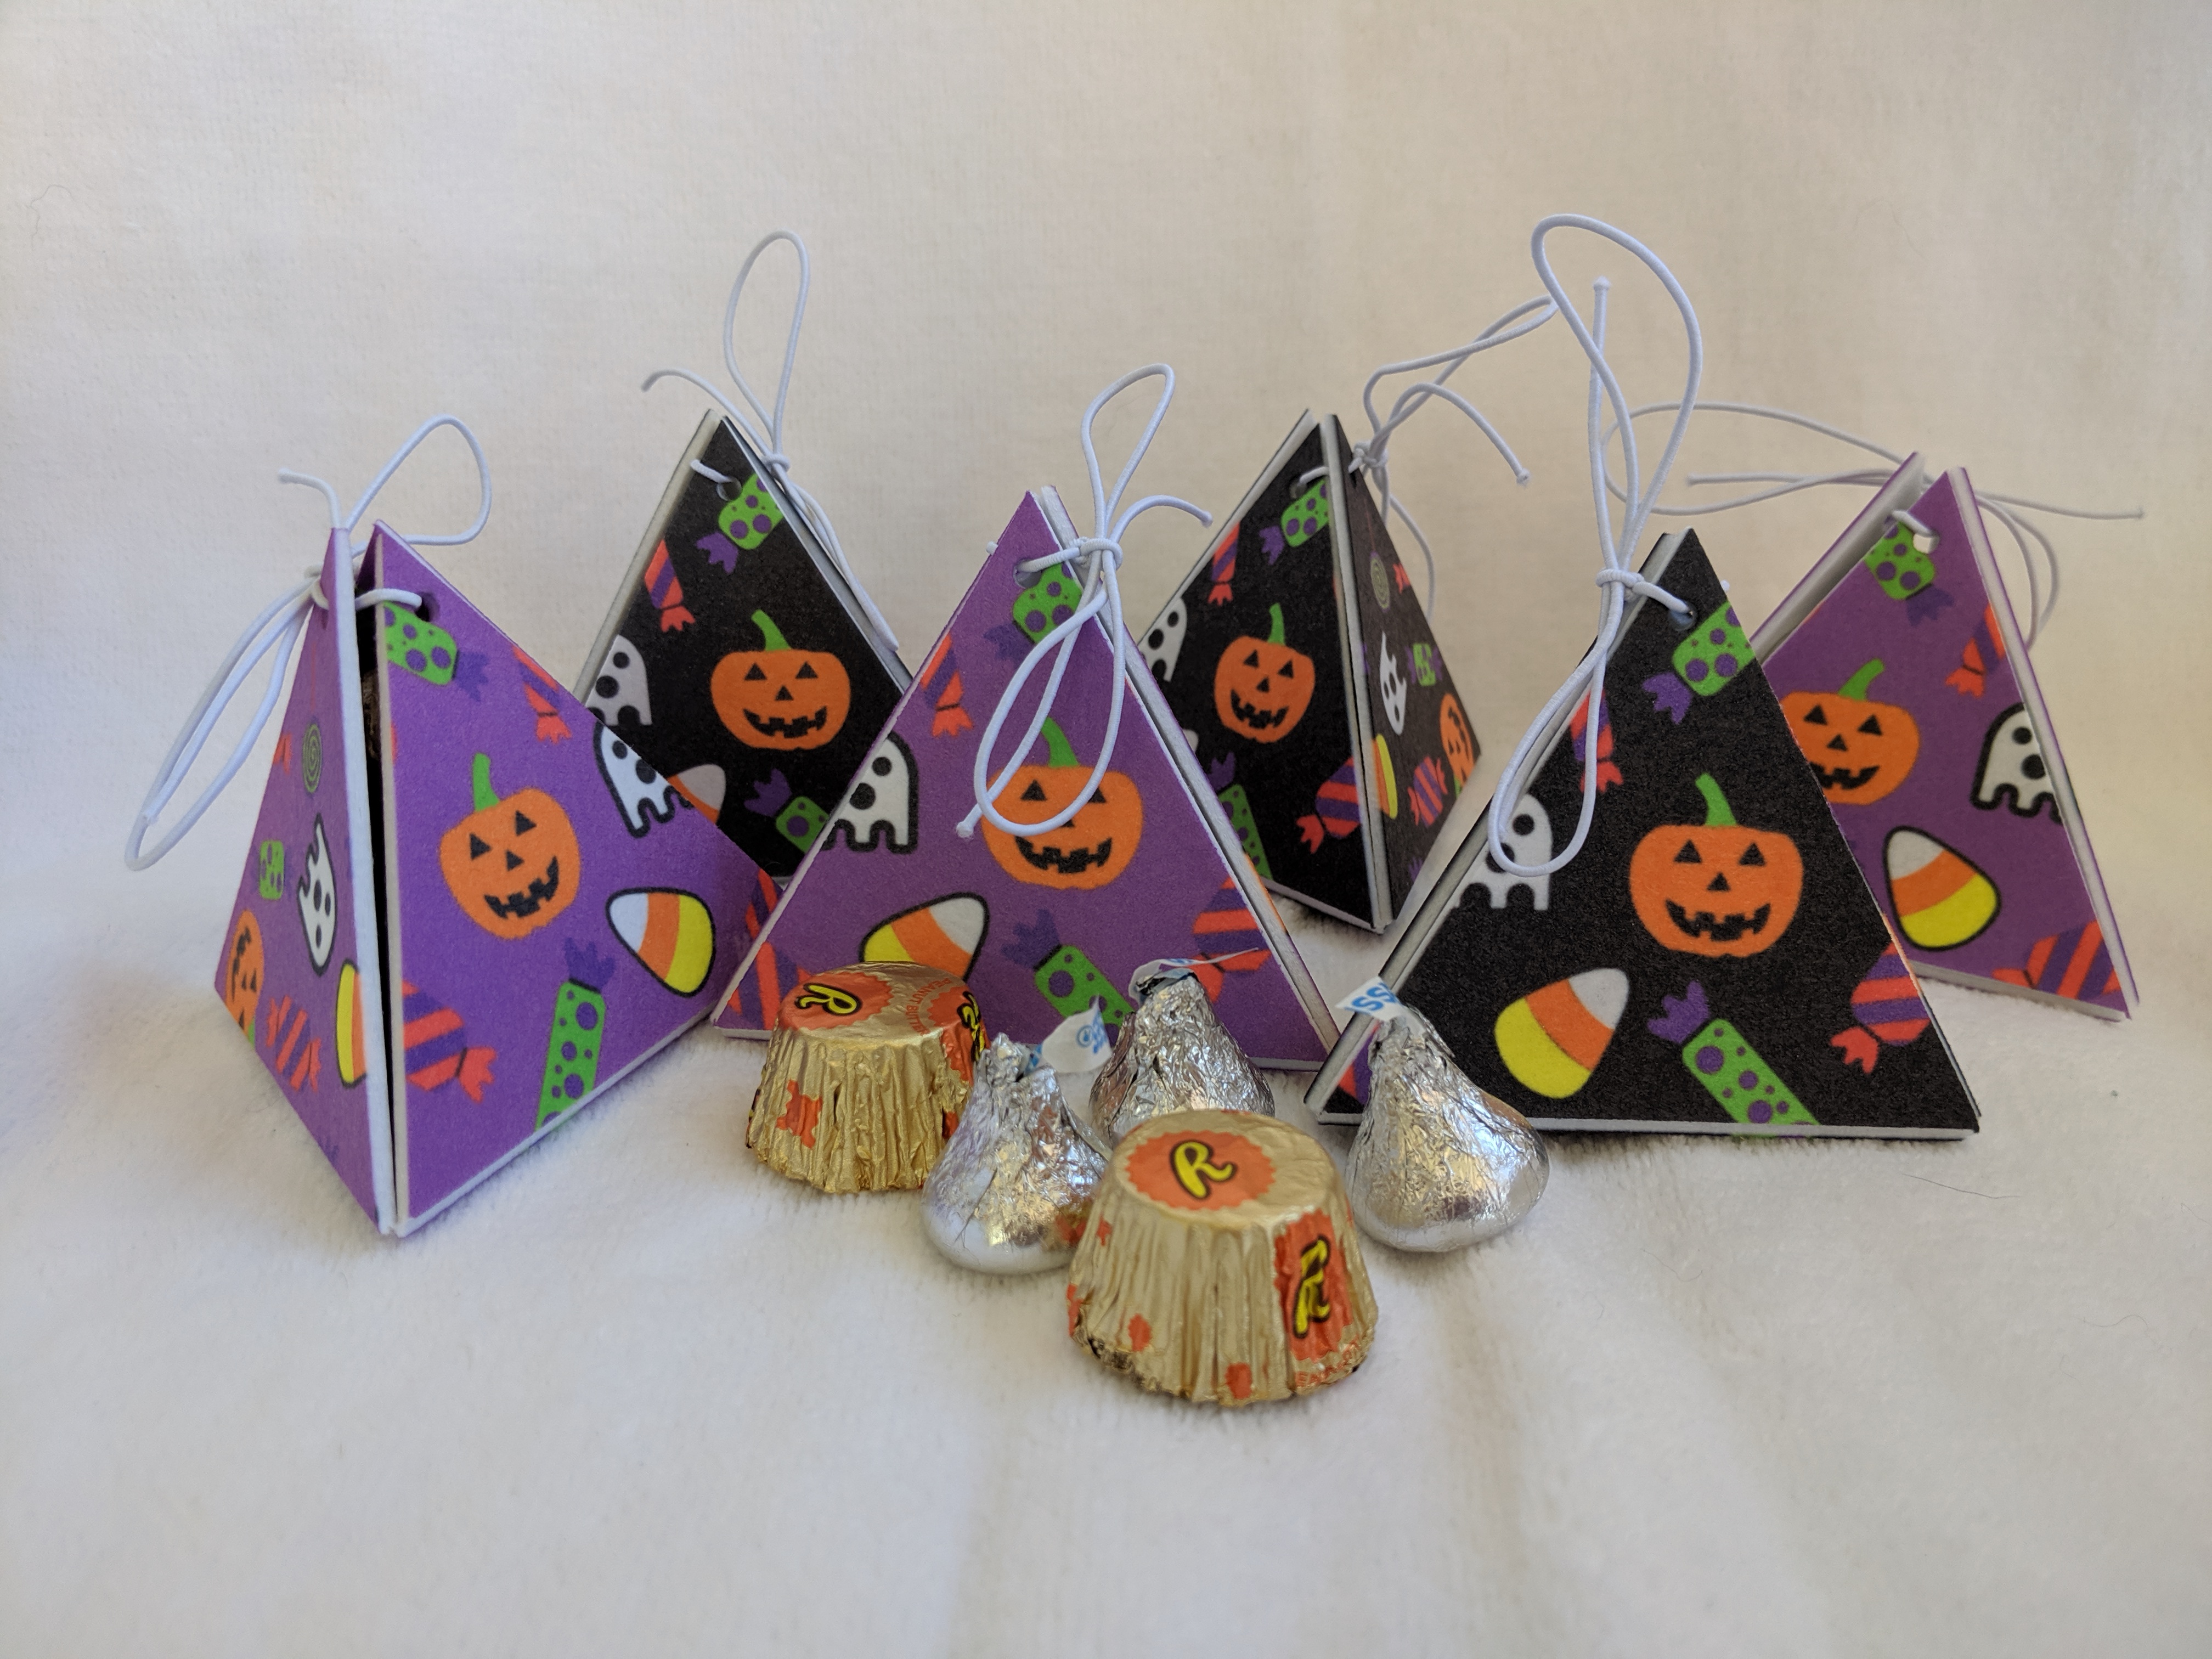 The triangle felt ornaments make great treat boxes for those special children in your life.  Lo